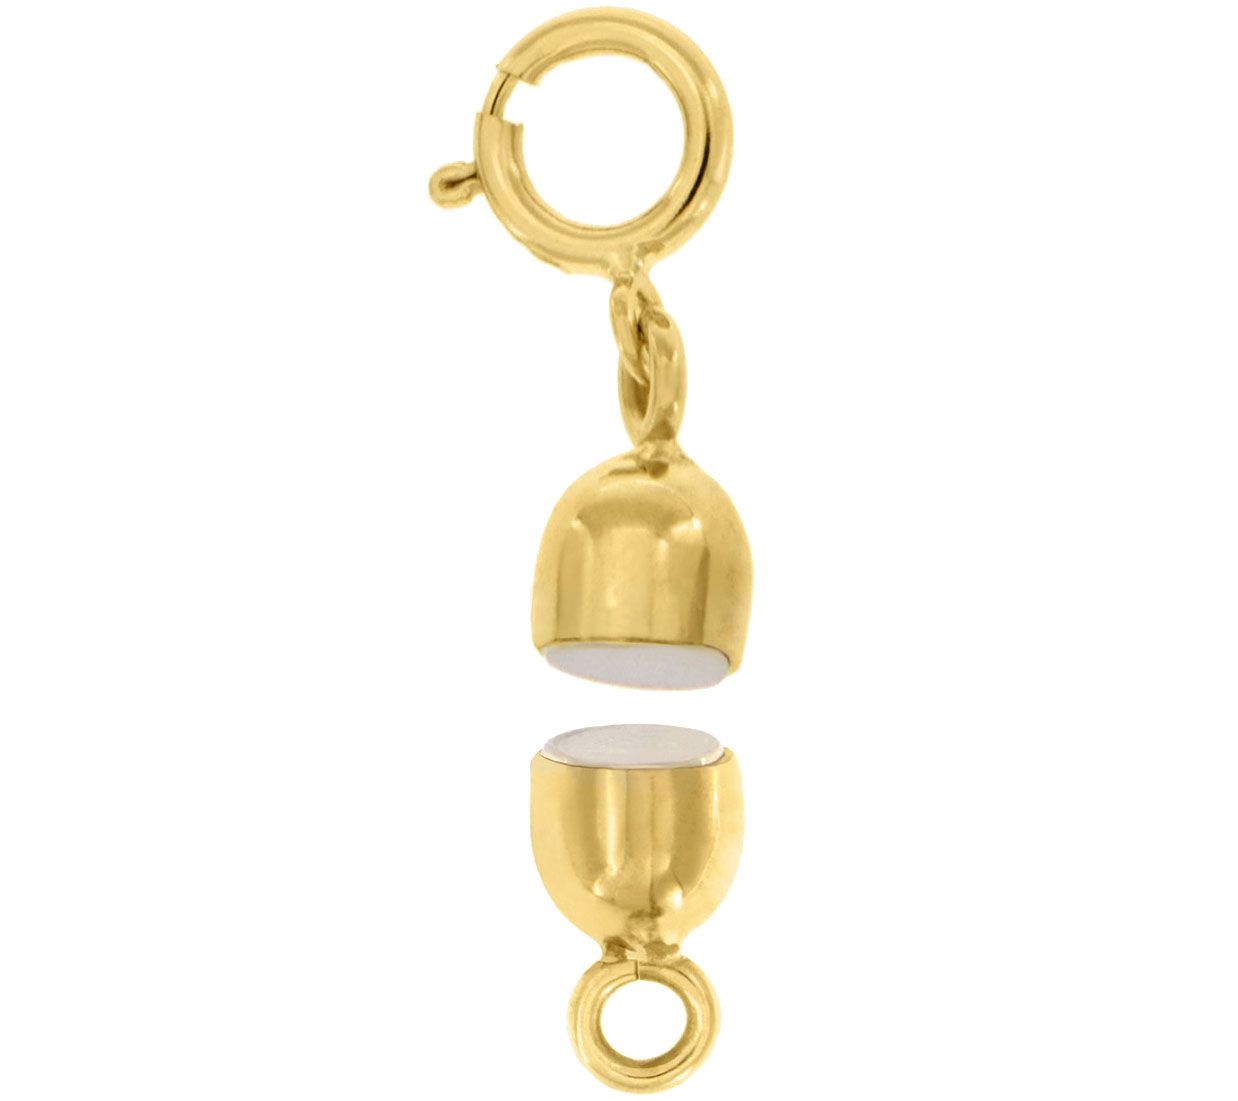 Italian 14kt Yellow Gold Magnetic Clasp Converter with Safety Chain